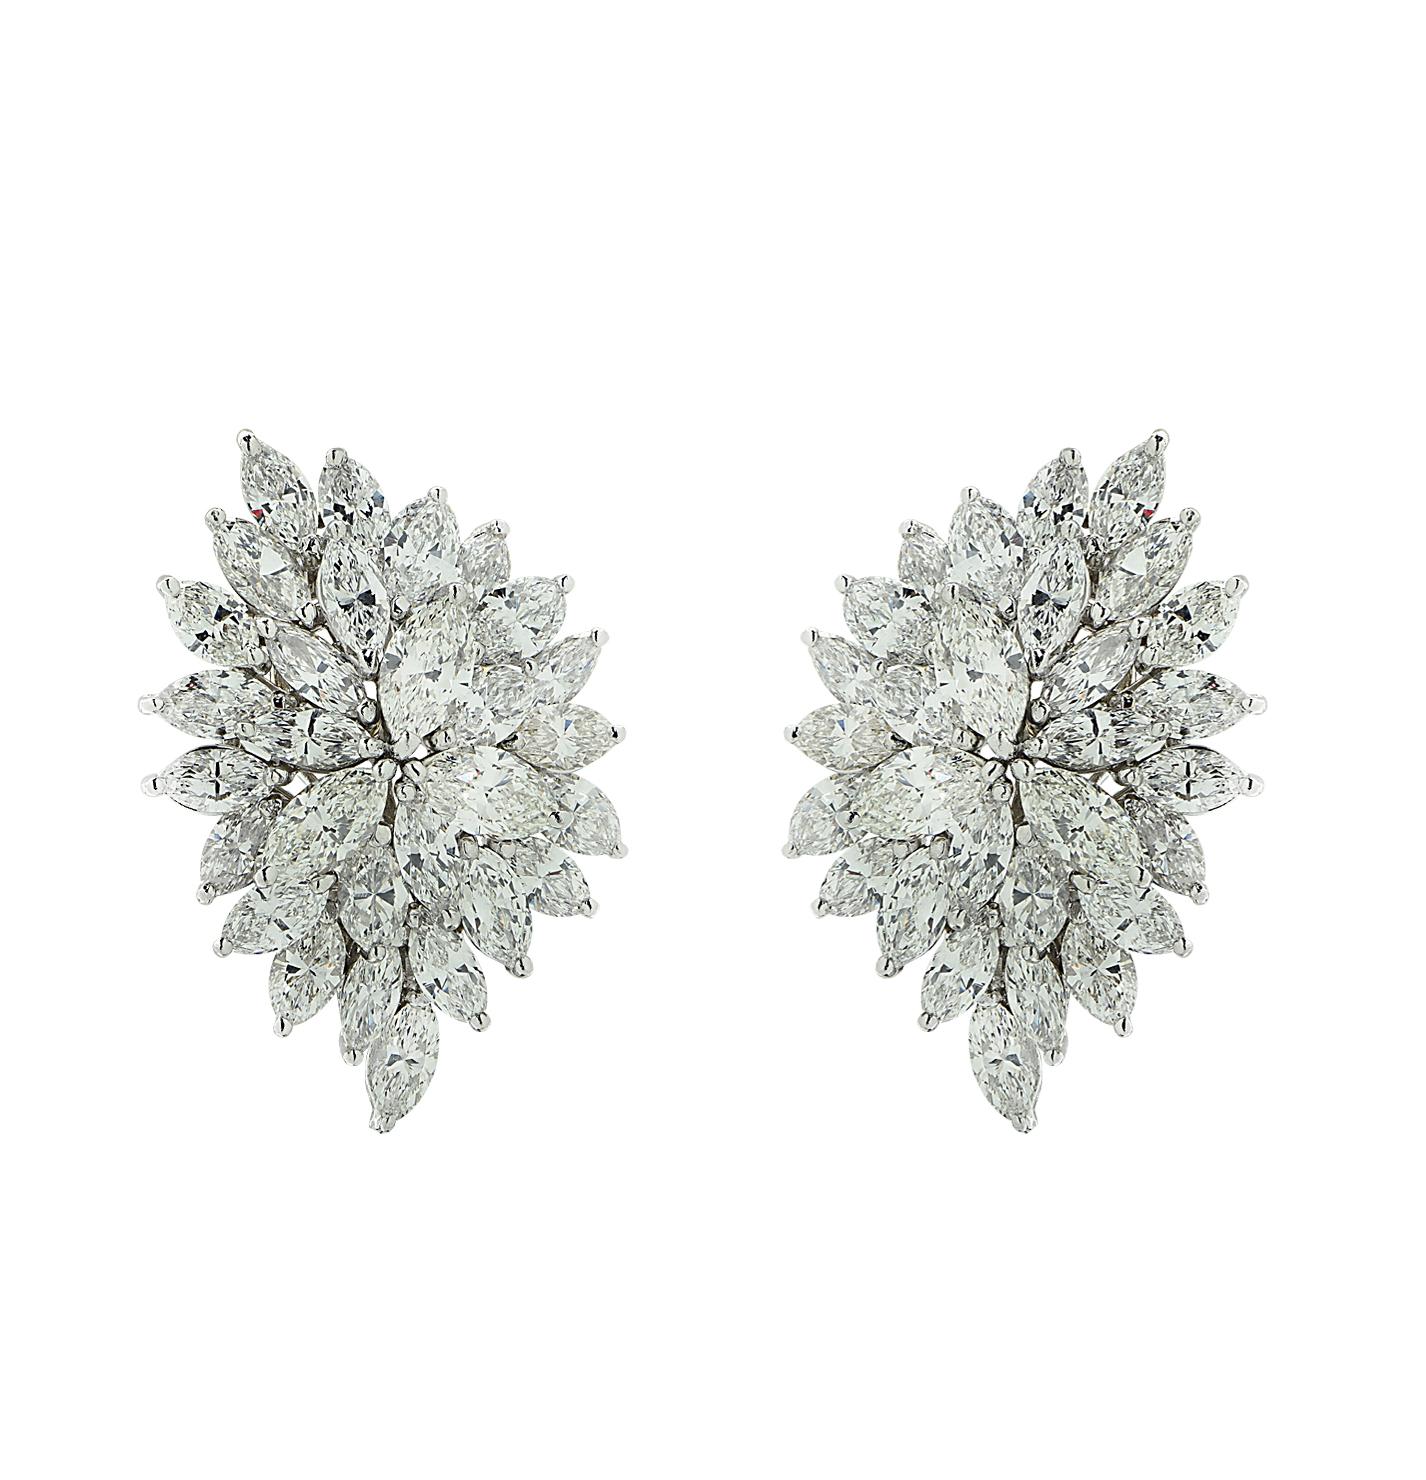 Exquisite diamond earrings finely crafted in 18 karat white gold, showcasing 56 marquise cut diamonds weighing approximately 12.70 carats total, F-J color, VS clarity. The earrings are fashioned into clusters adorned with diamonds, capturing the